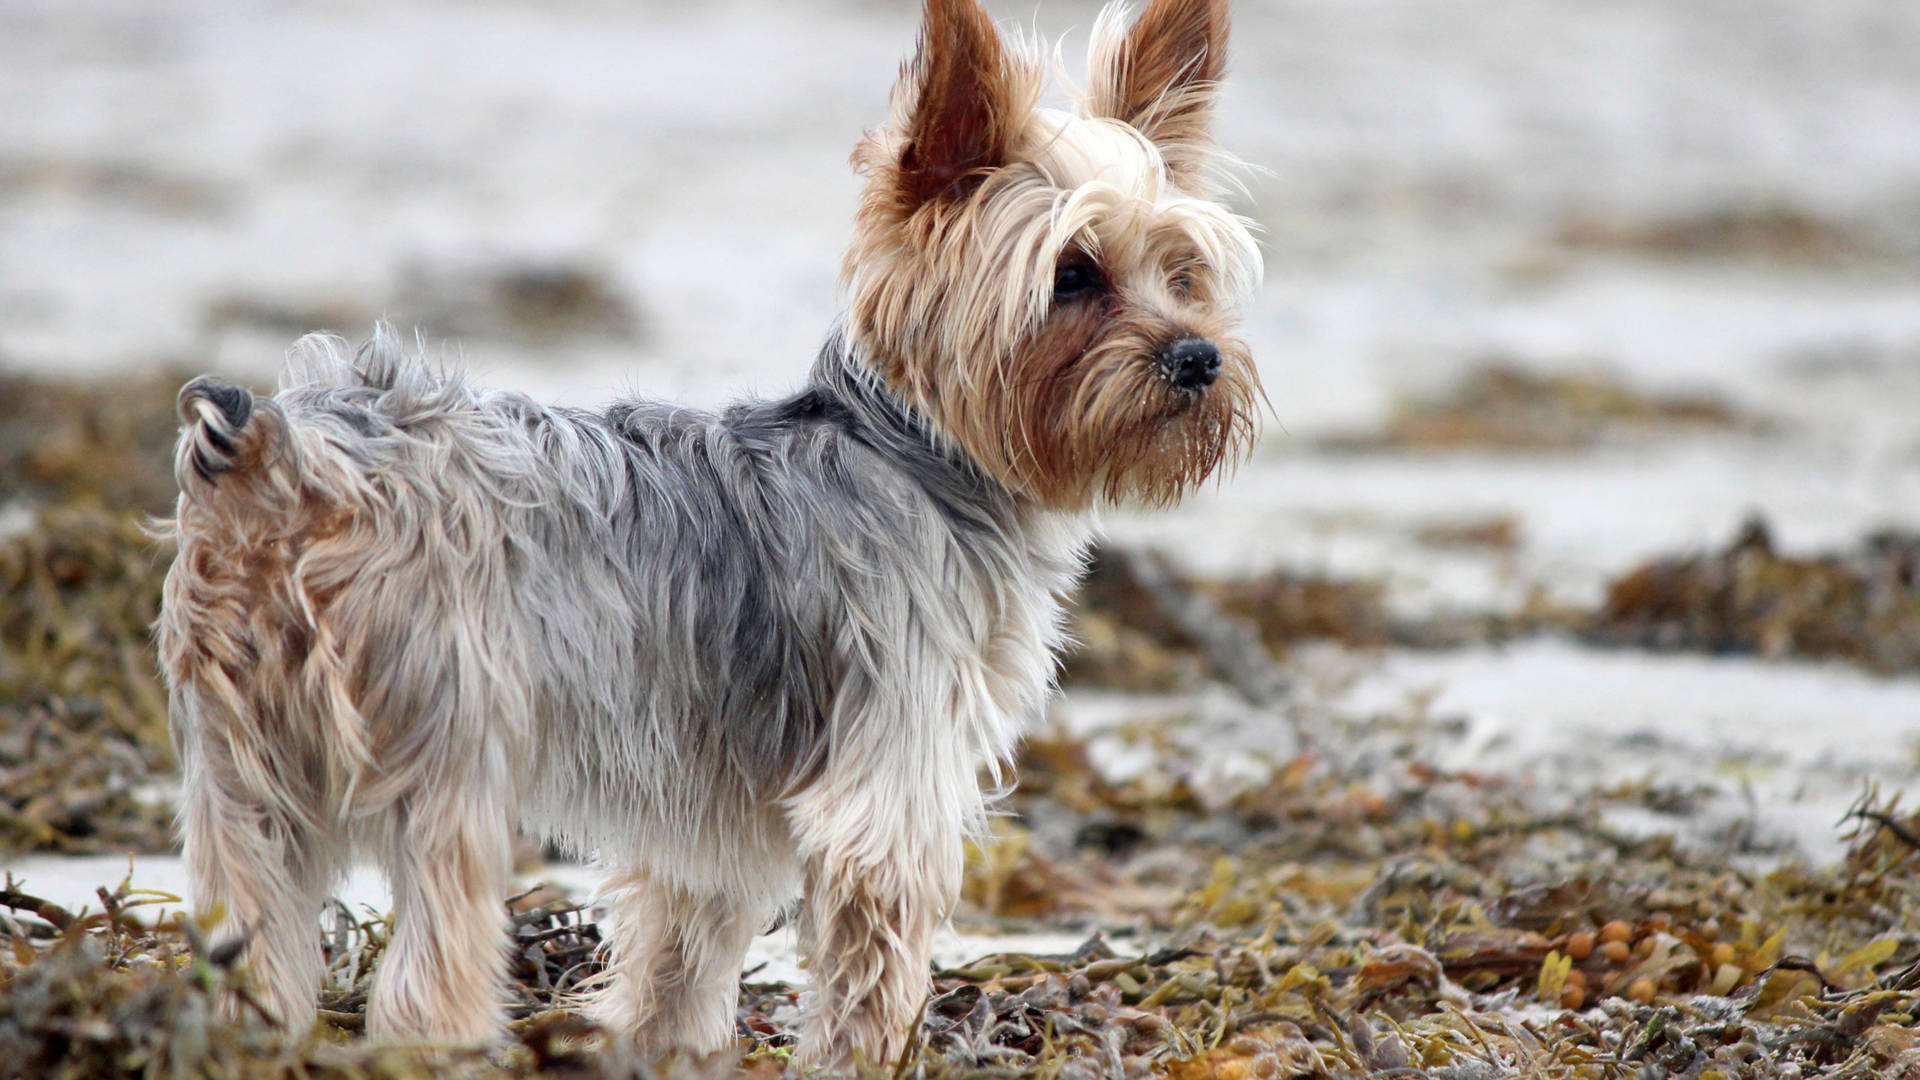 Adorable Yorkshire Terrier Beach Photography Wallpaper